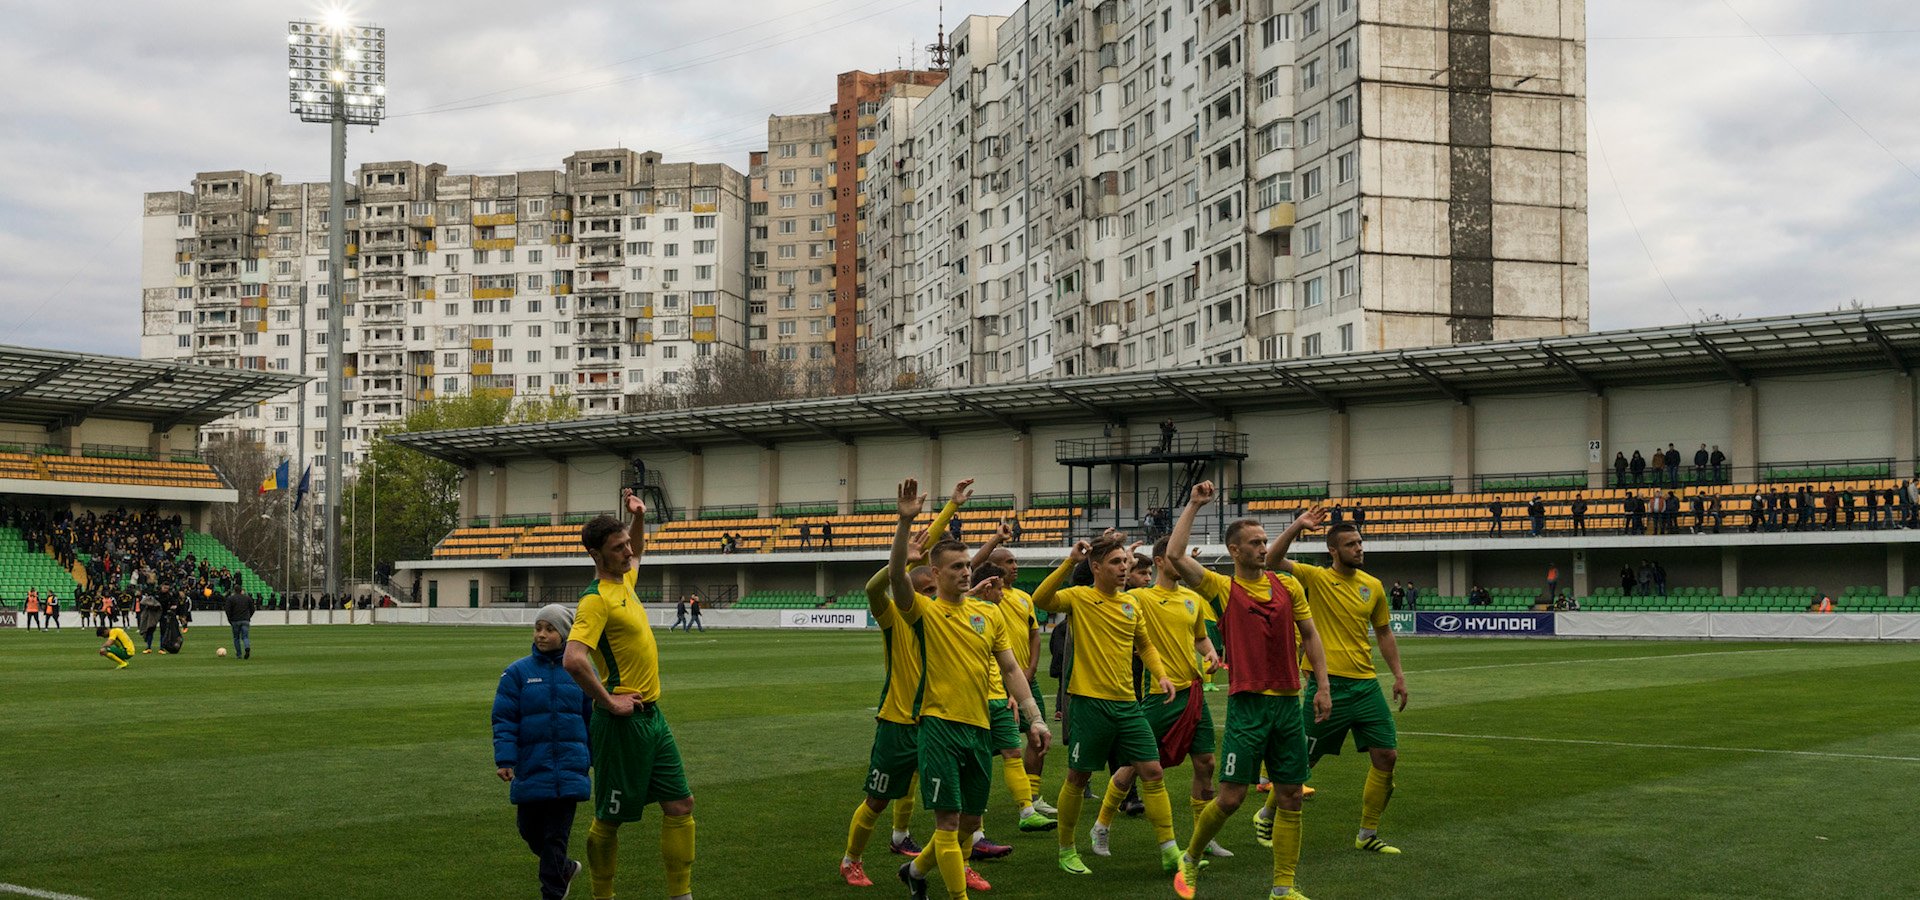 How football brought Moldova and Transnistria together, despite 27 years of frozen conflict